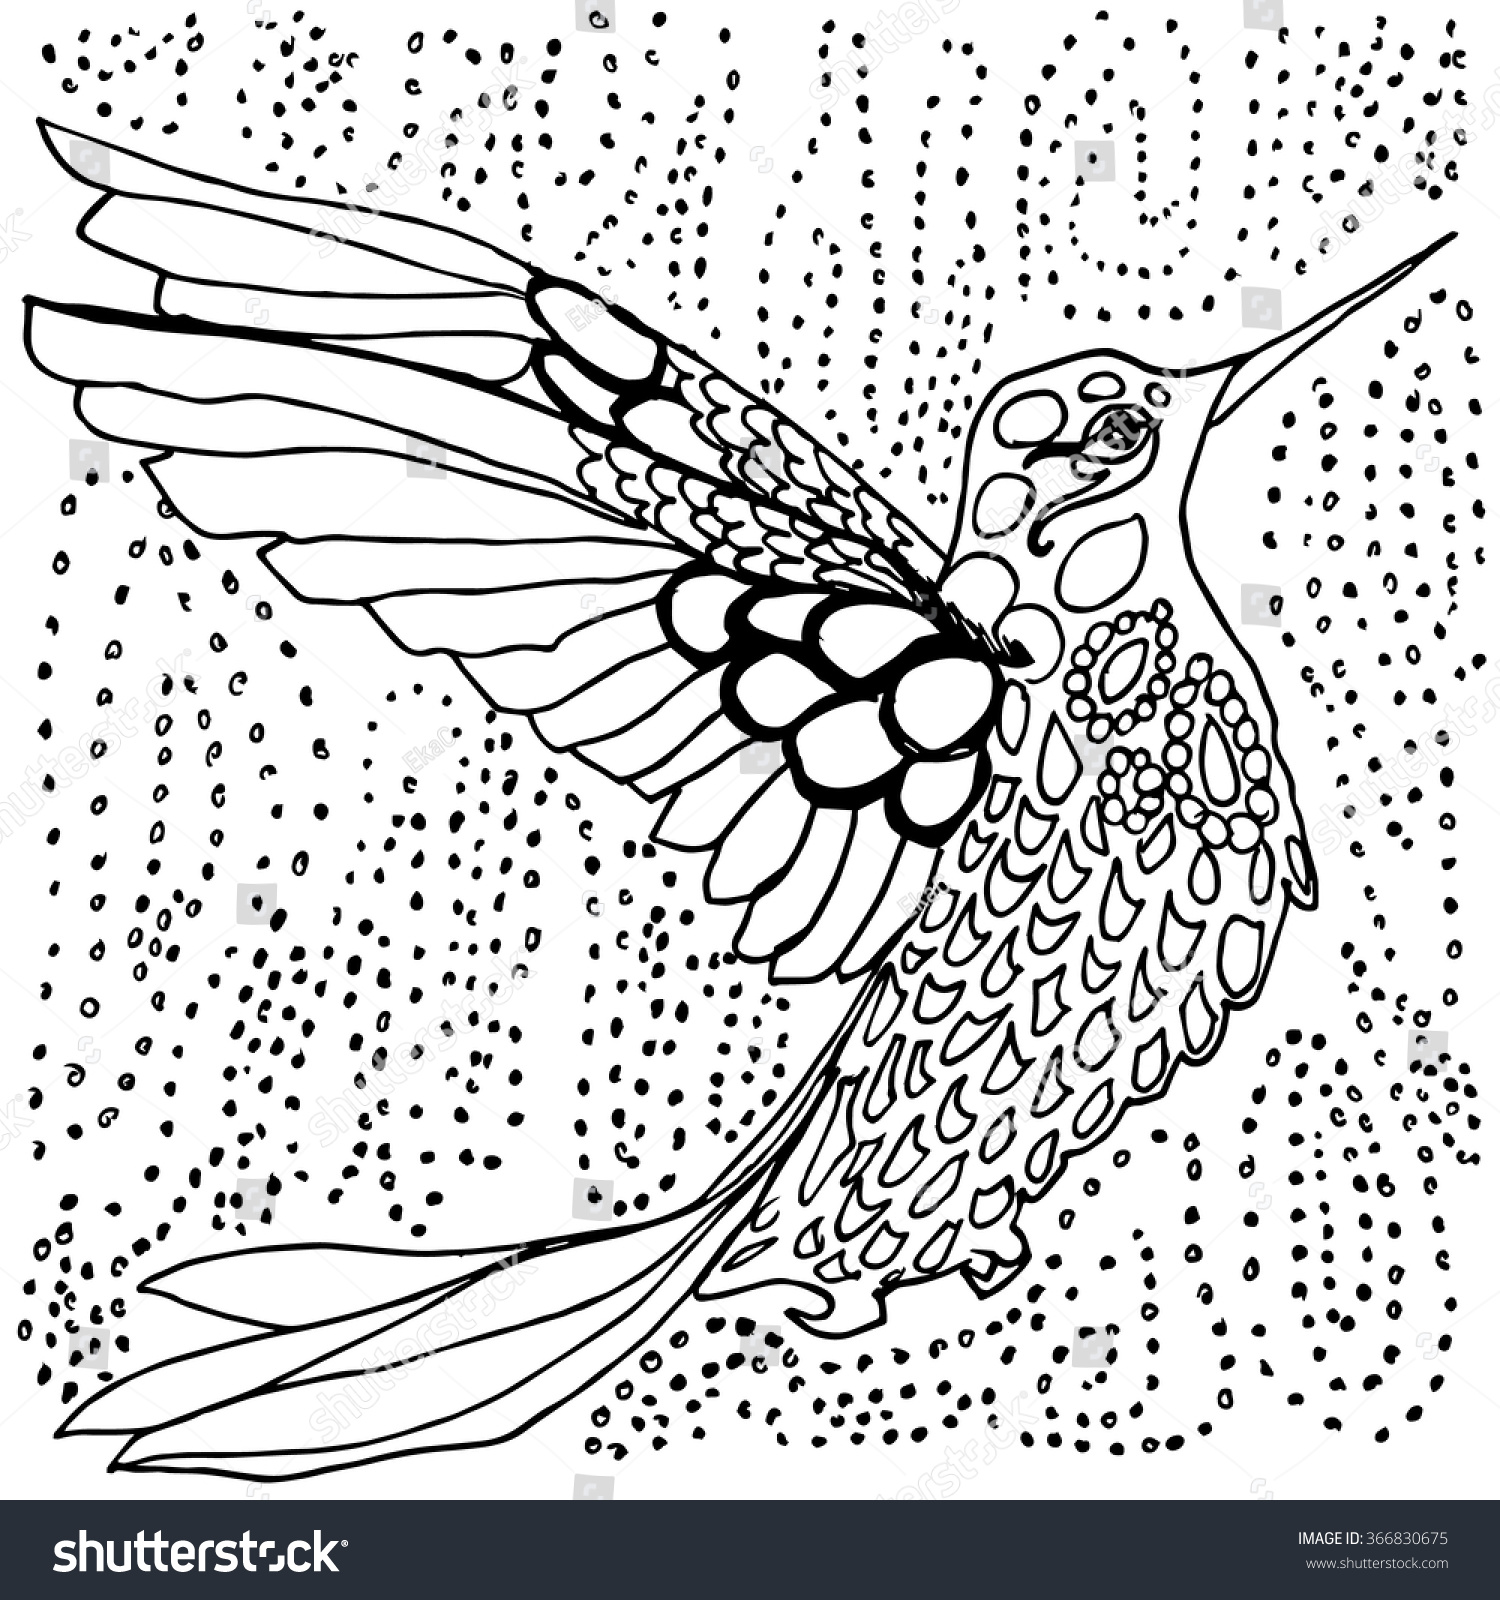 Hummingbird coloring page black and white drawing outlines in pen and ink hand drawn tiny